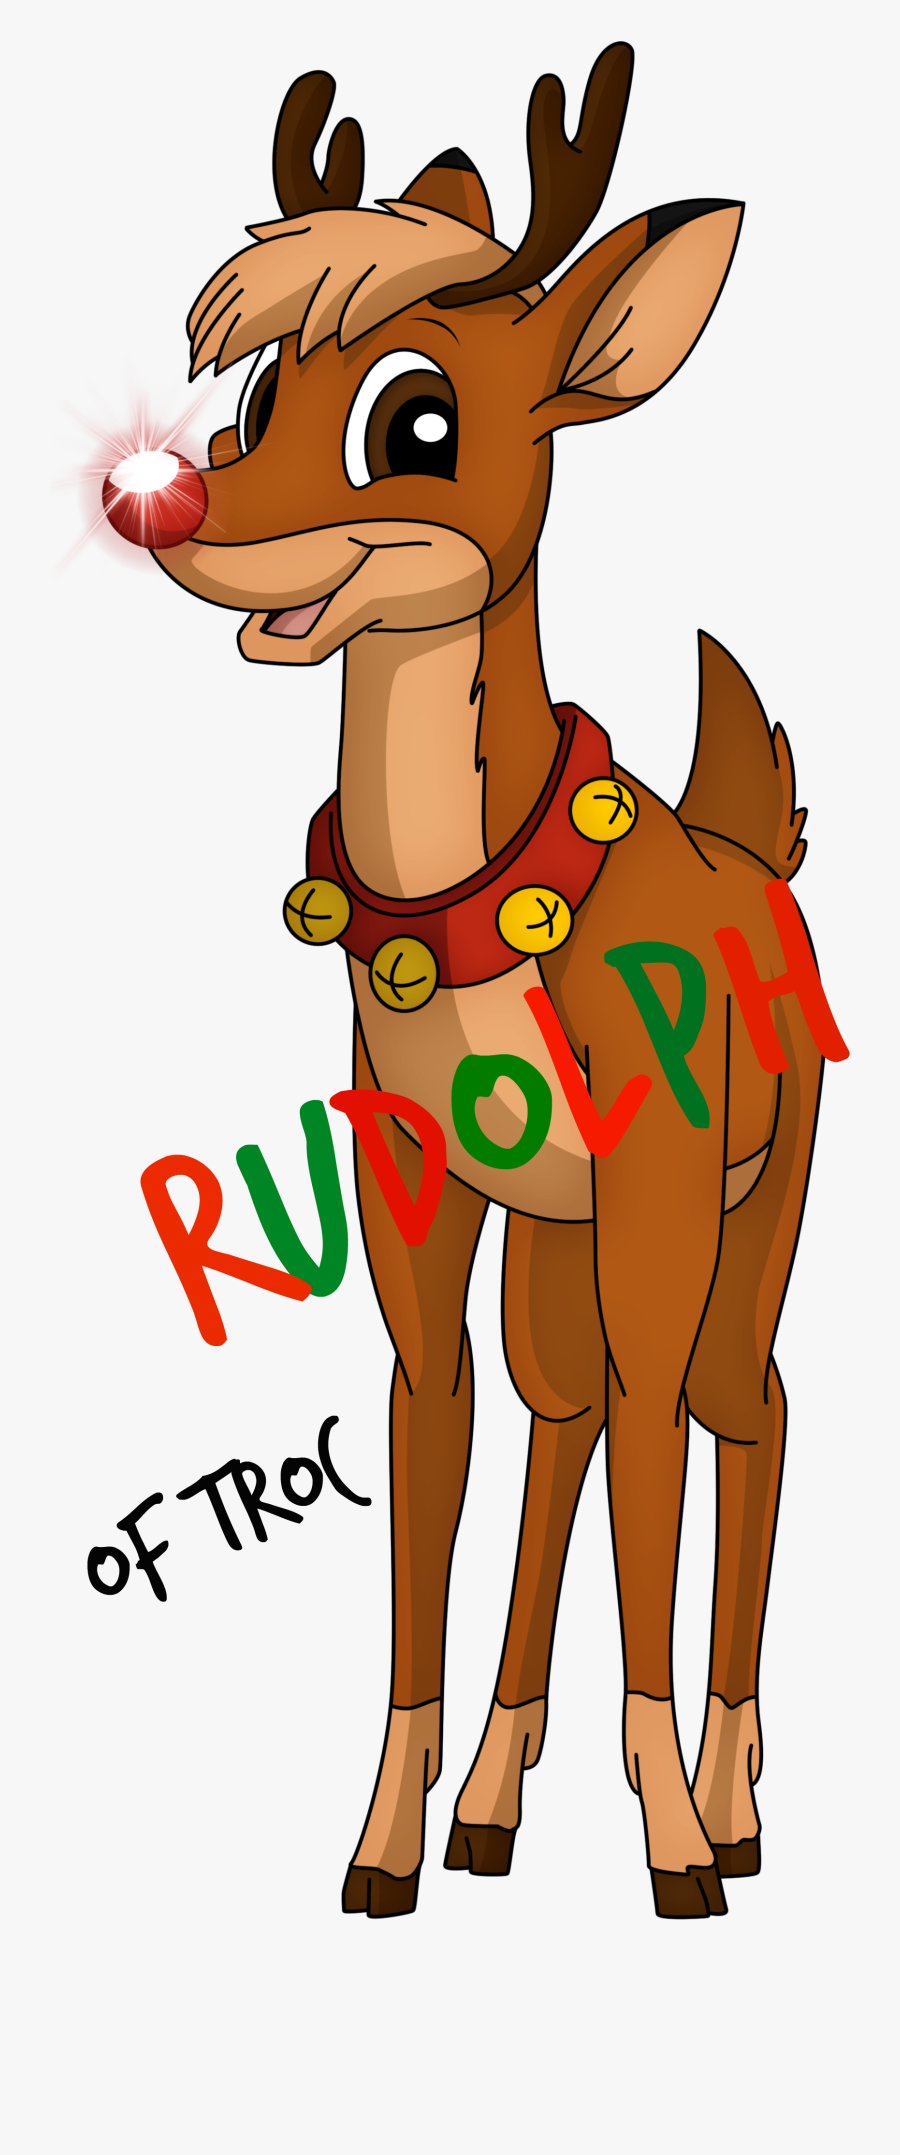 Svg Freeuse Download Image By Xxsteefylovexx D - Rudolph The Red Nosed Reindeer Png, Transparent Clipart